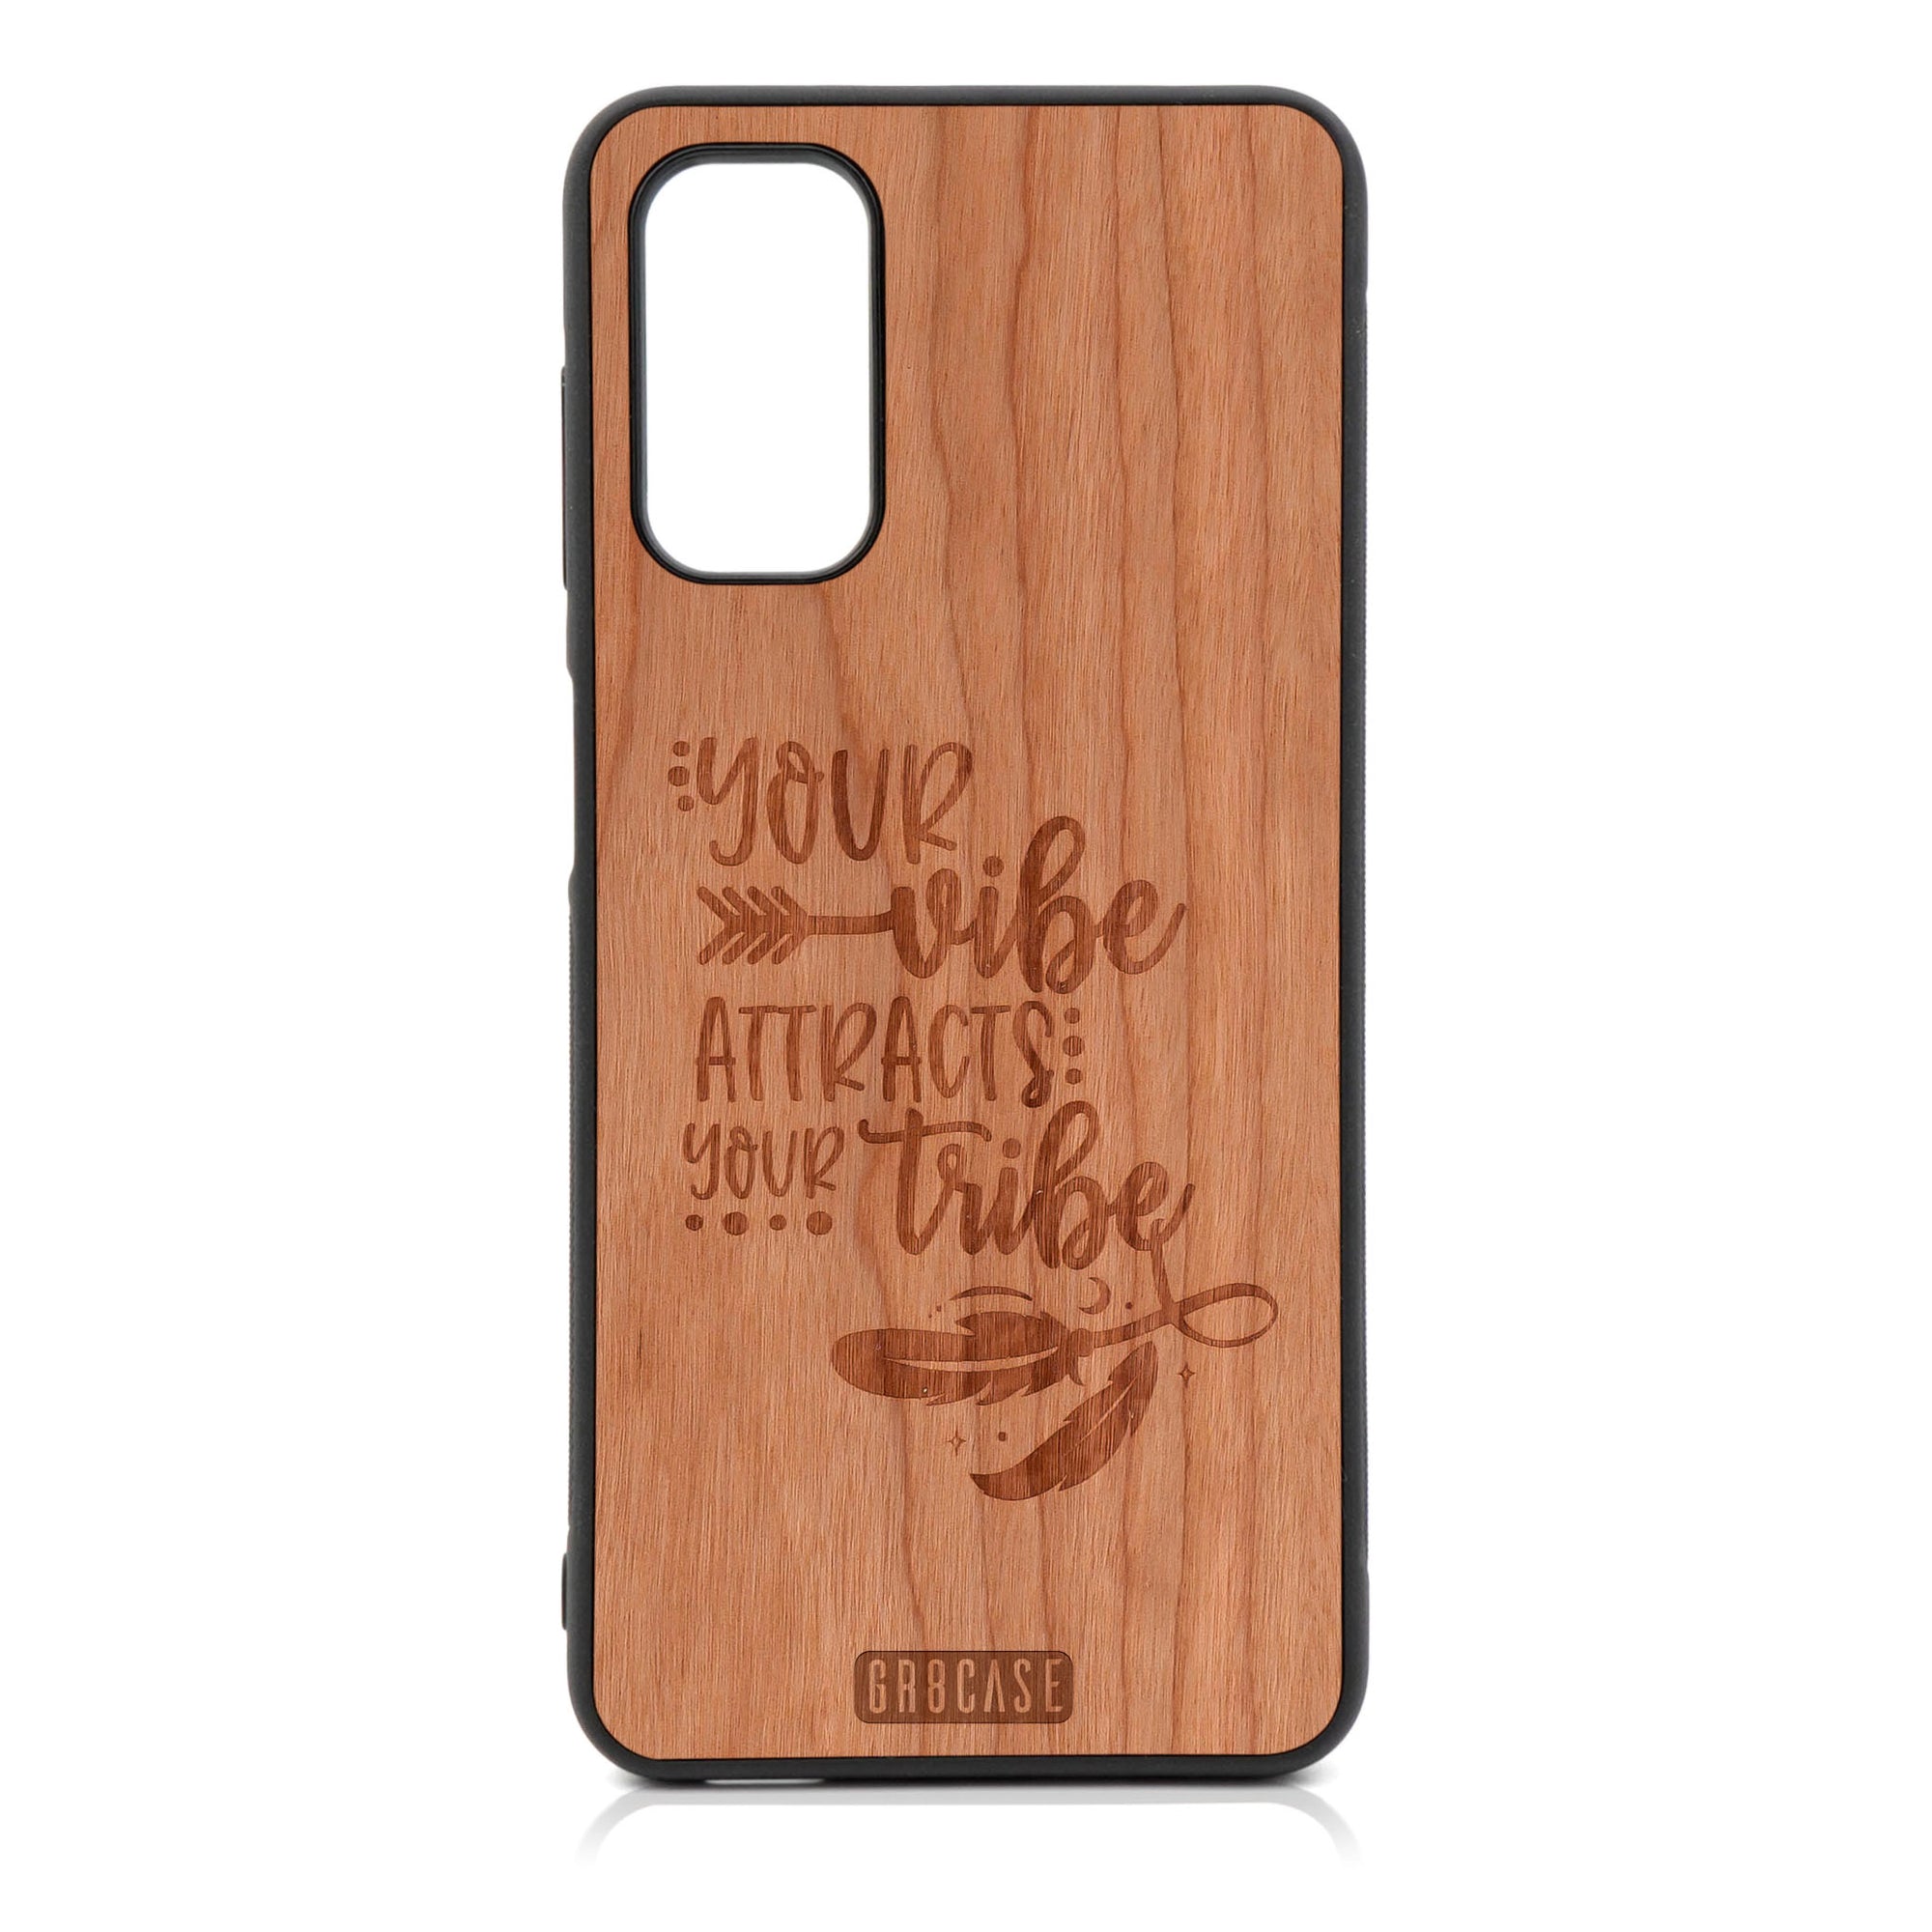 Your Vibe Attracts Your Tribe Design Wood Case For Galaxy A13 5G